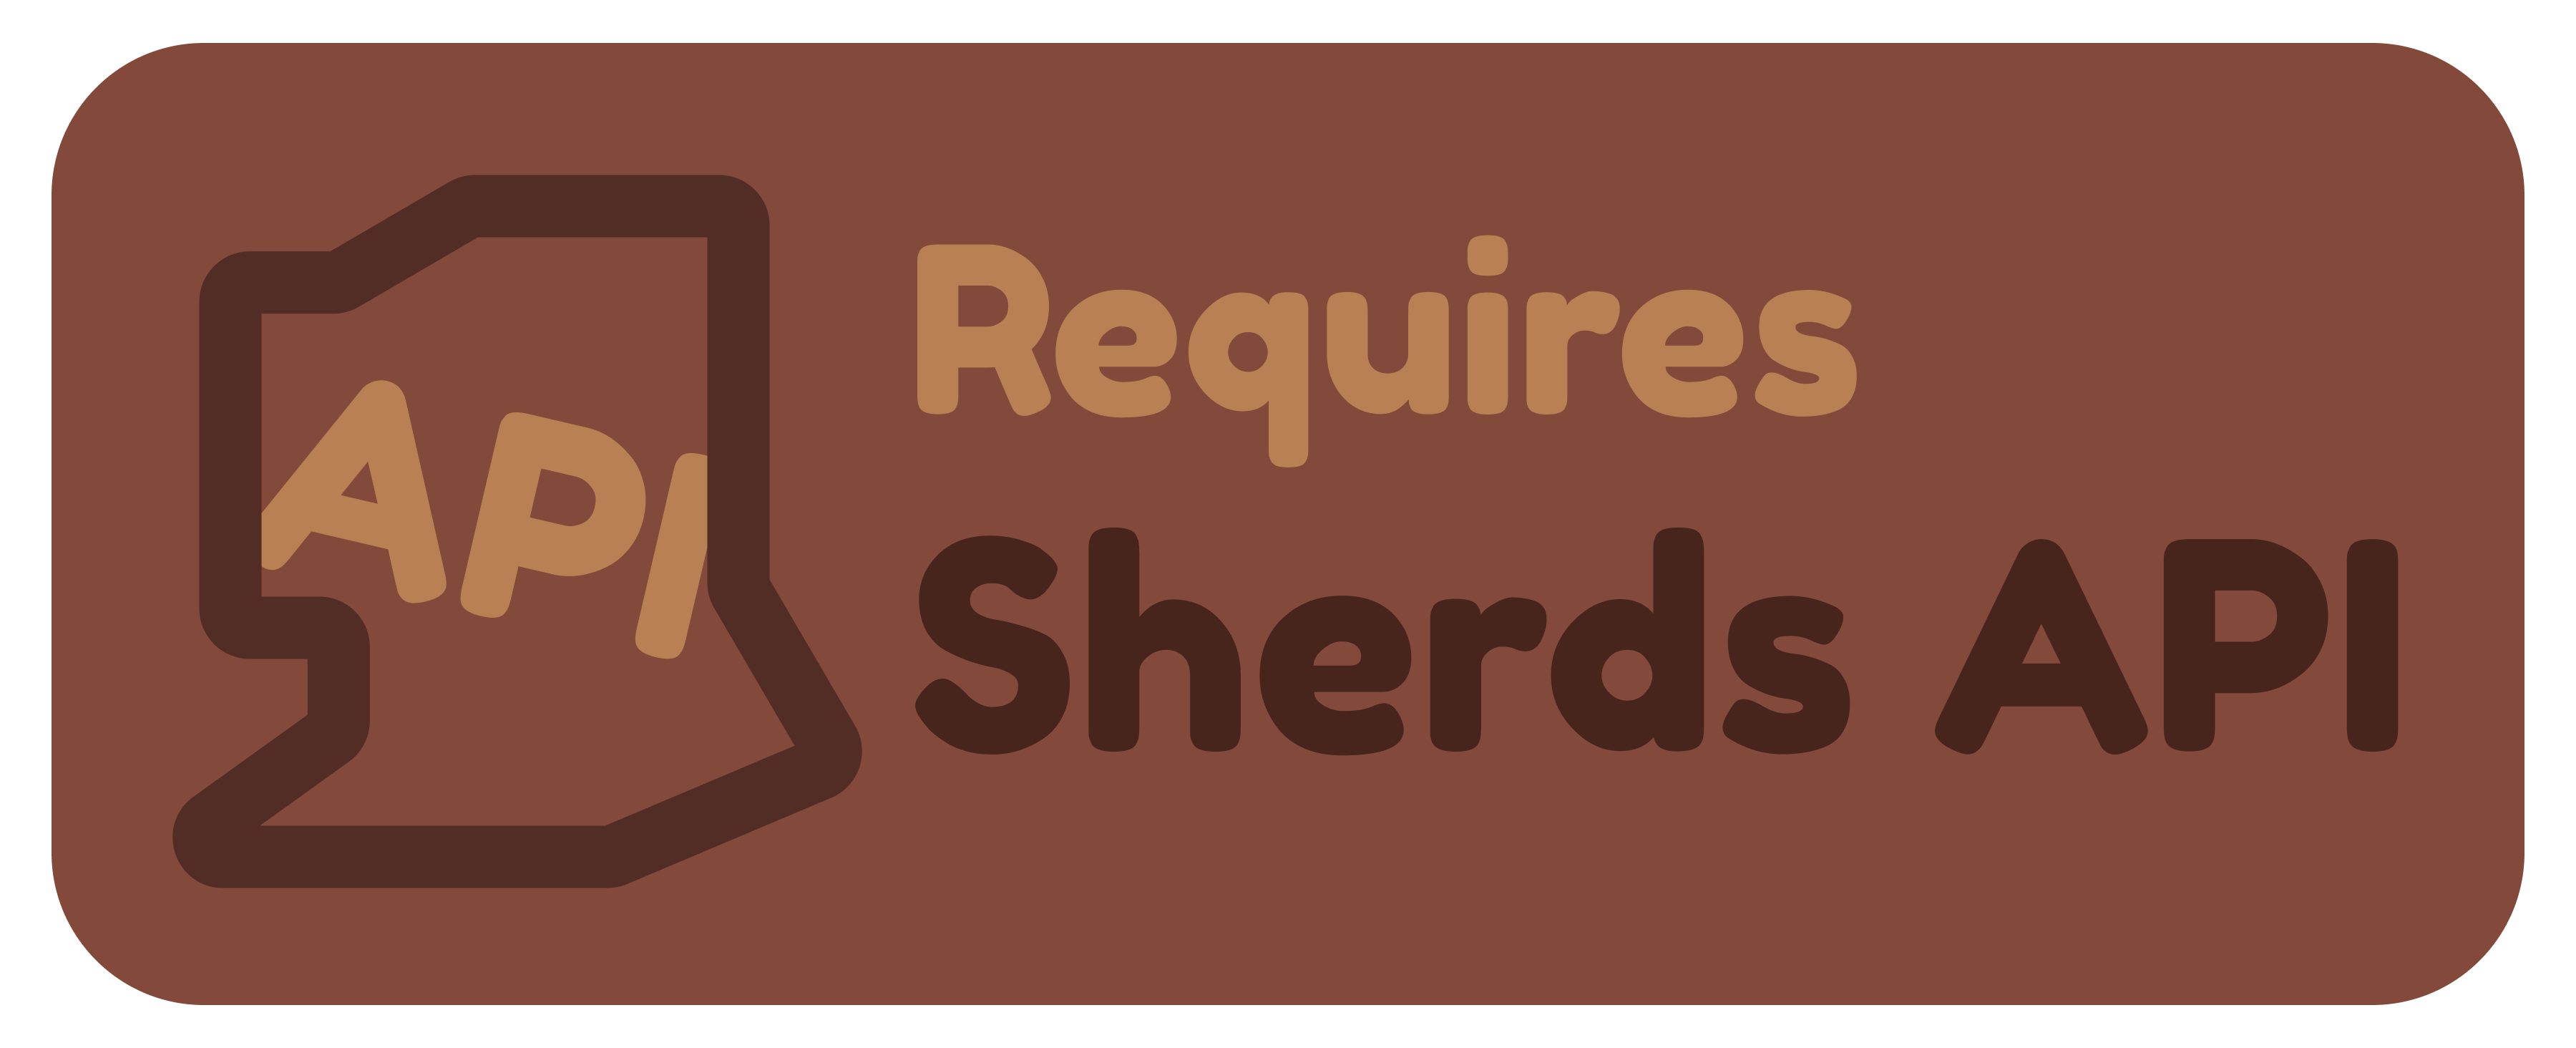 "Required" badge